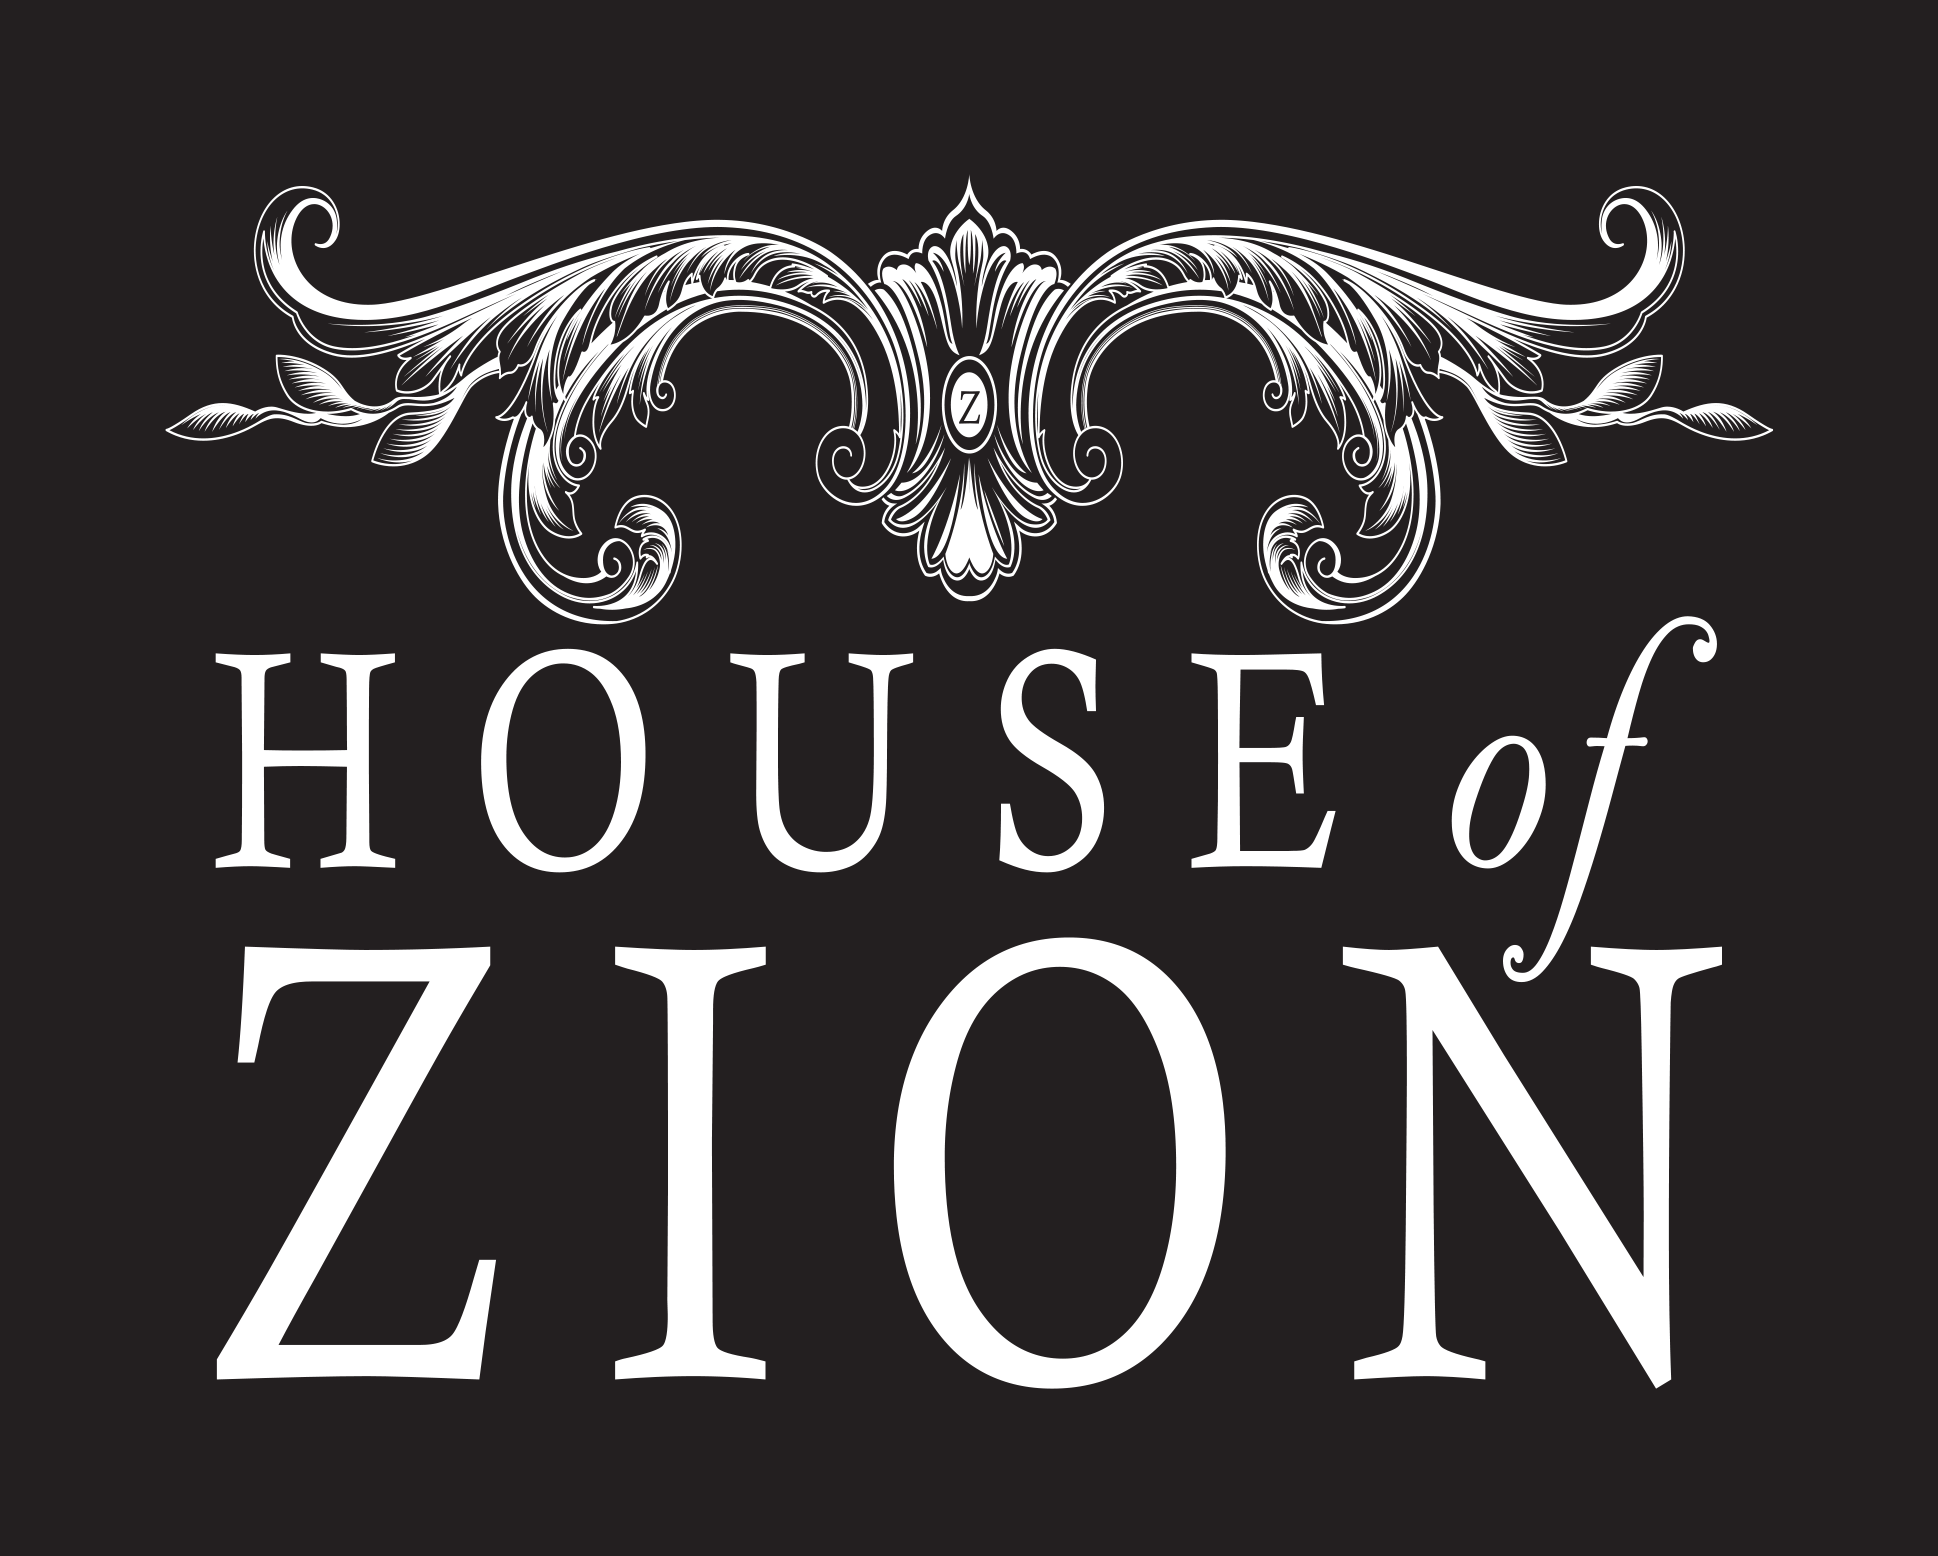 HOUSE OF ZION